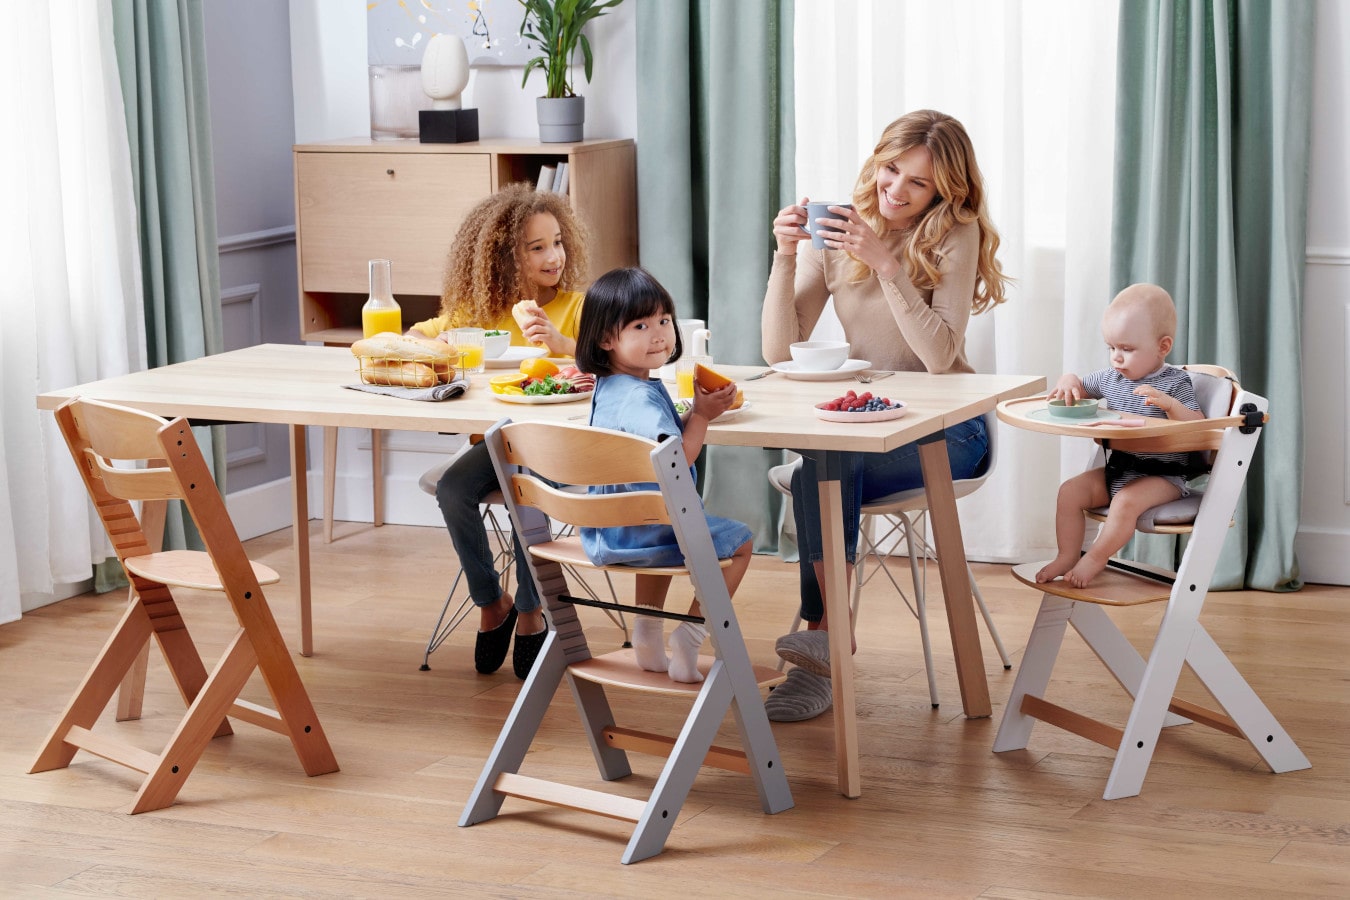 Mum and three children sitting at one table, mum is drinking a coffee and the children are happy. The ENOCK high chair has three available configurations – from a high chair to a chair for older children.